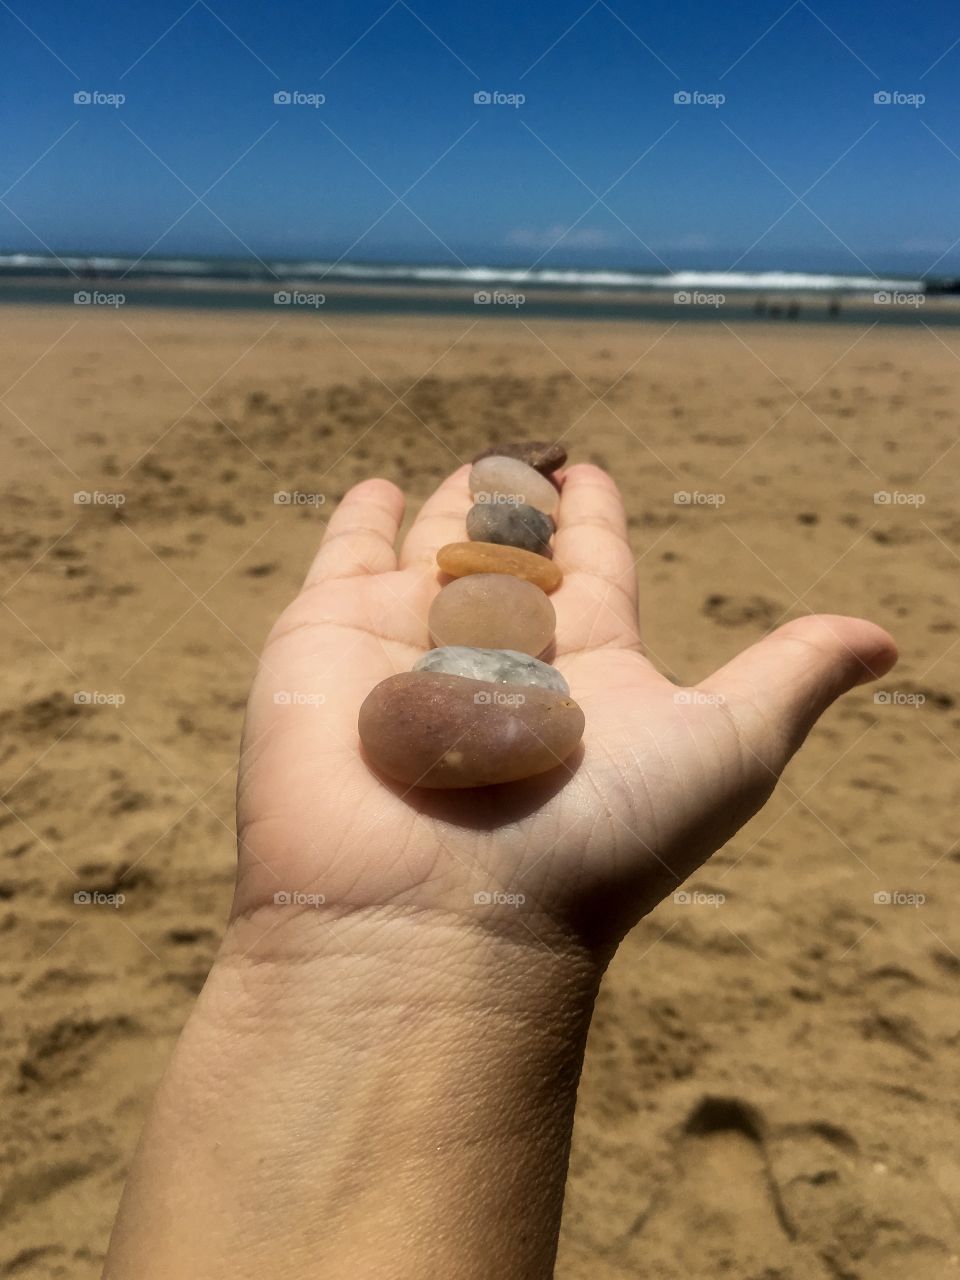 Playing with stones, with their colors, with their sizes, with their beauty, with their difference that makes each one of them more special than the other.